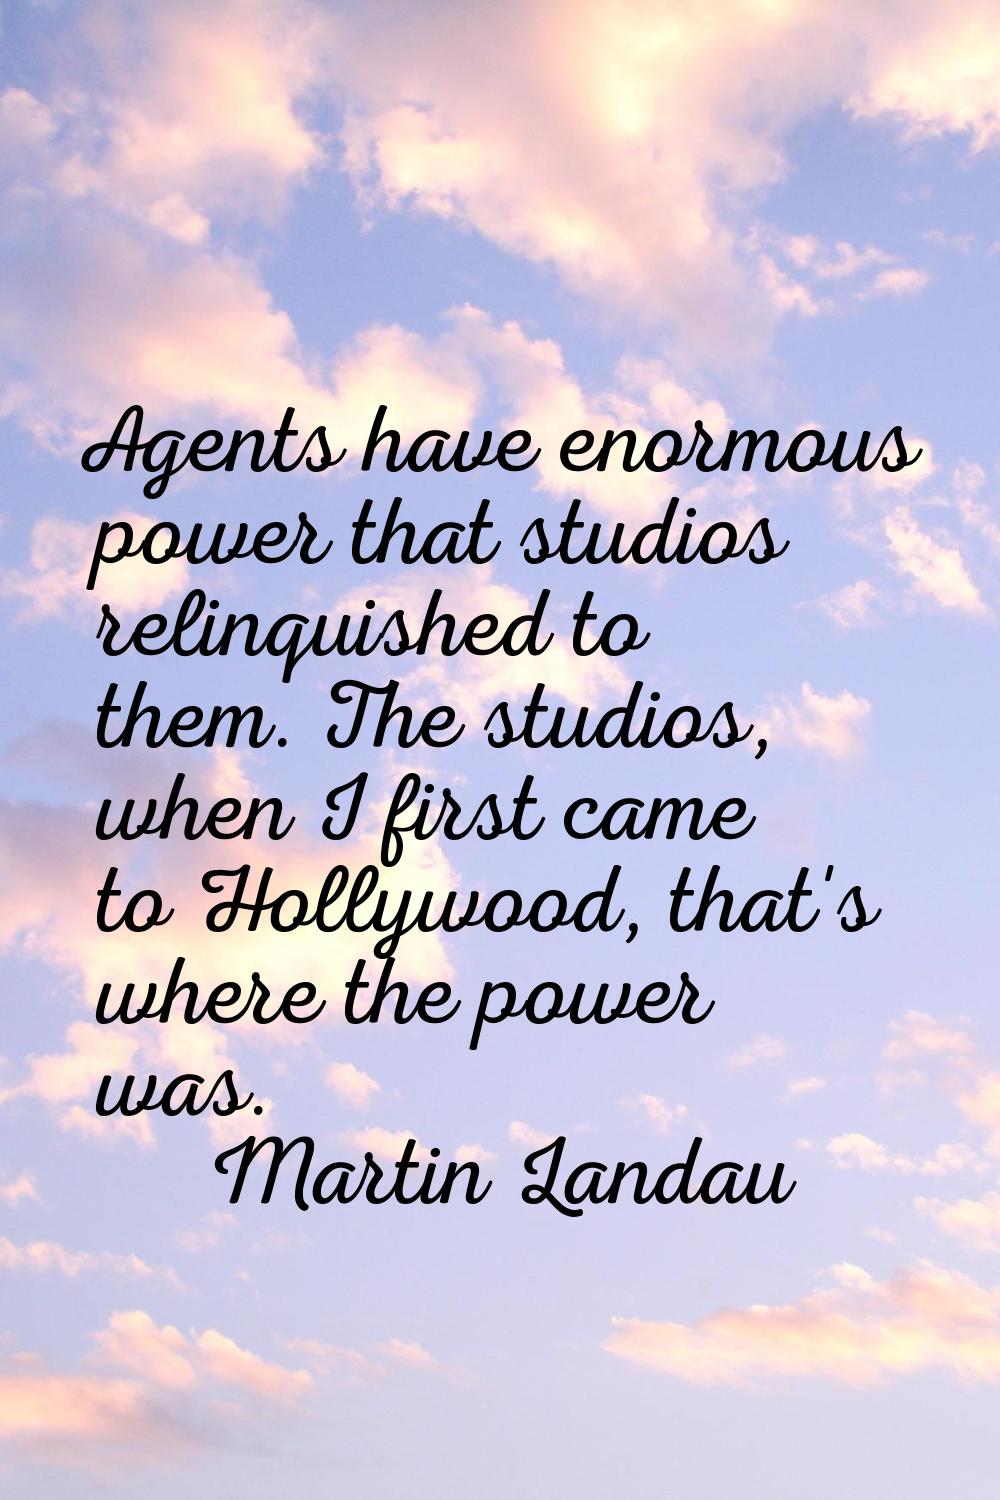 Agents have enormous power that studios relinquished to them. The studios, when I first came to Hol